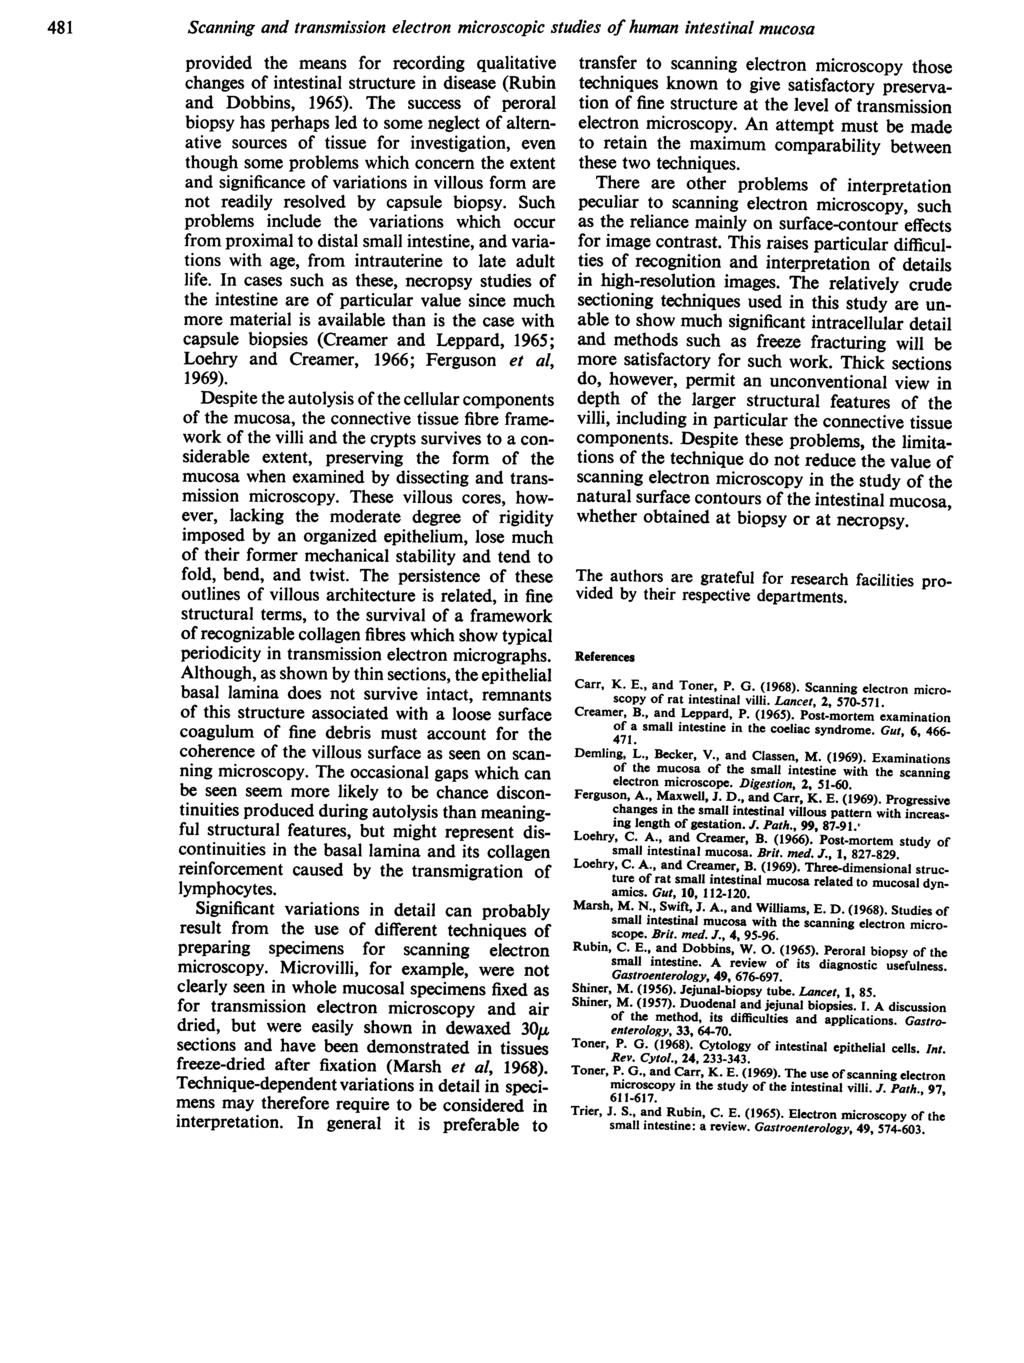 481 Scanning and transmission electron microscopic studies of human intestinal mucosa provided the means for recording qualitative changes of intestinal structure in disease (Rubin and Dobbins, 1965).